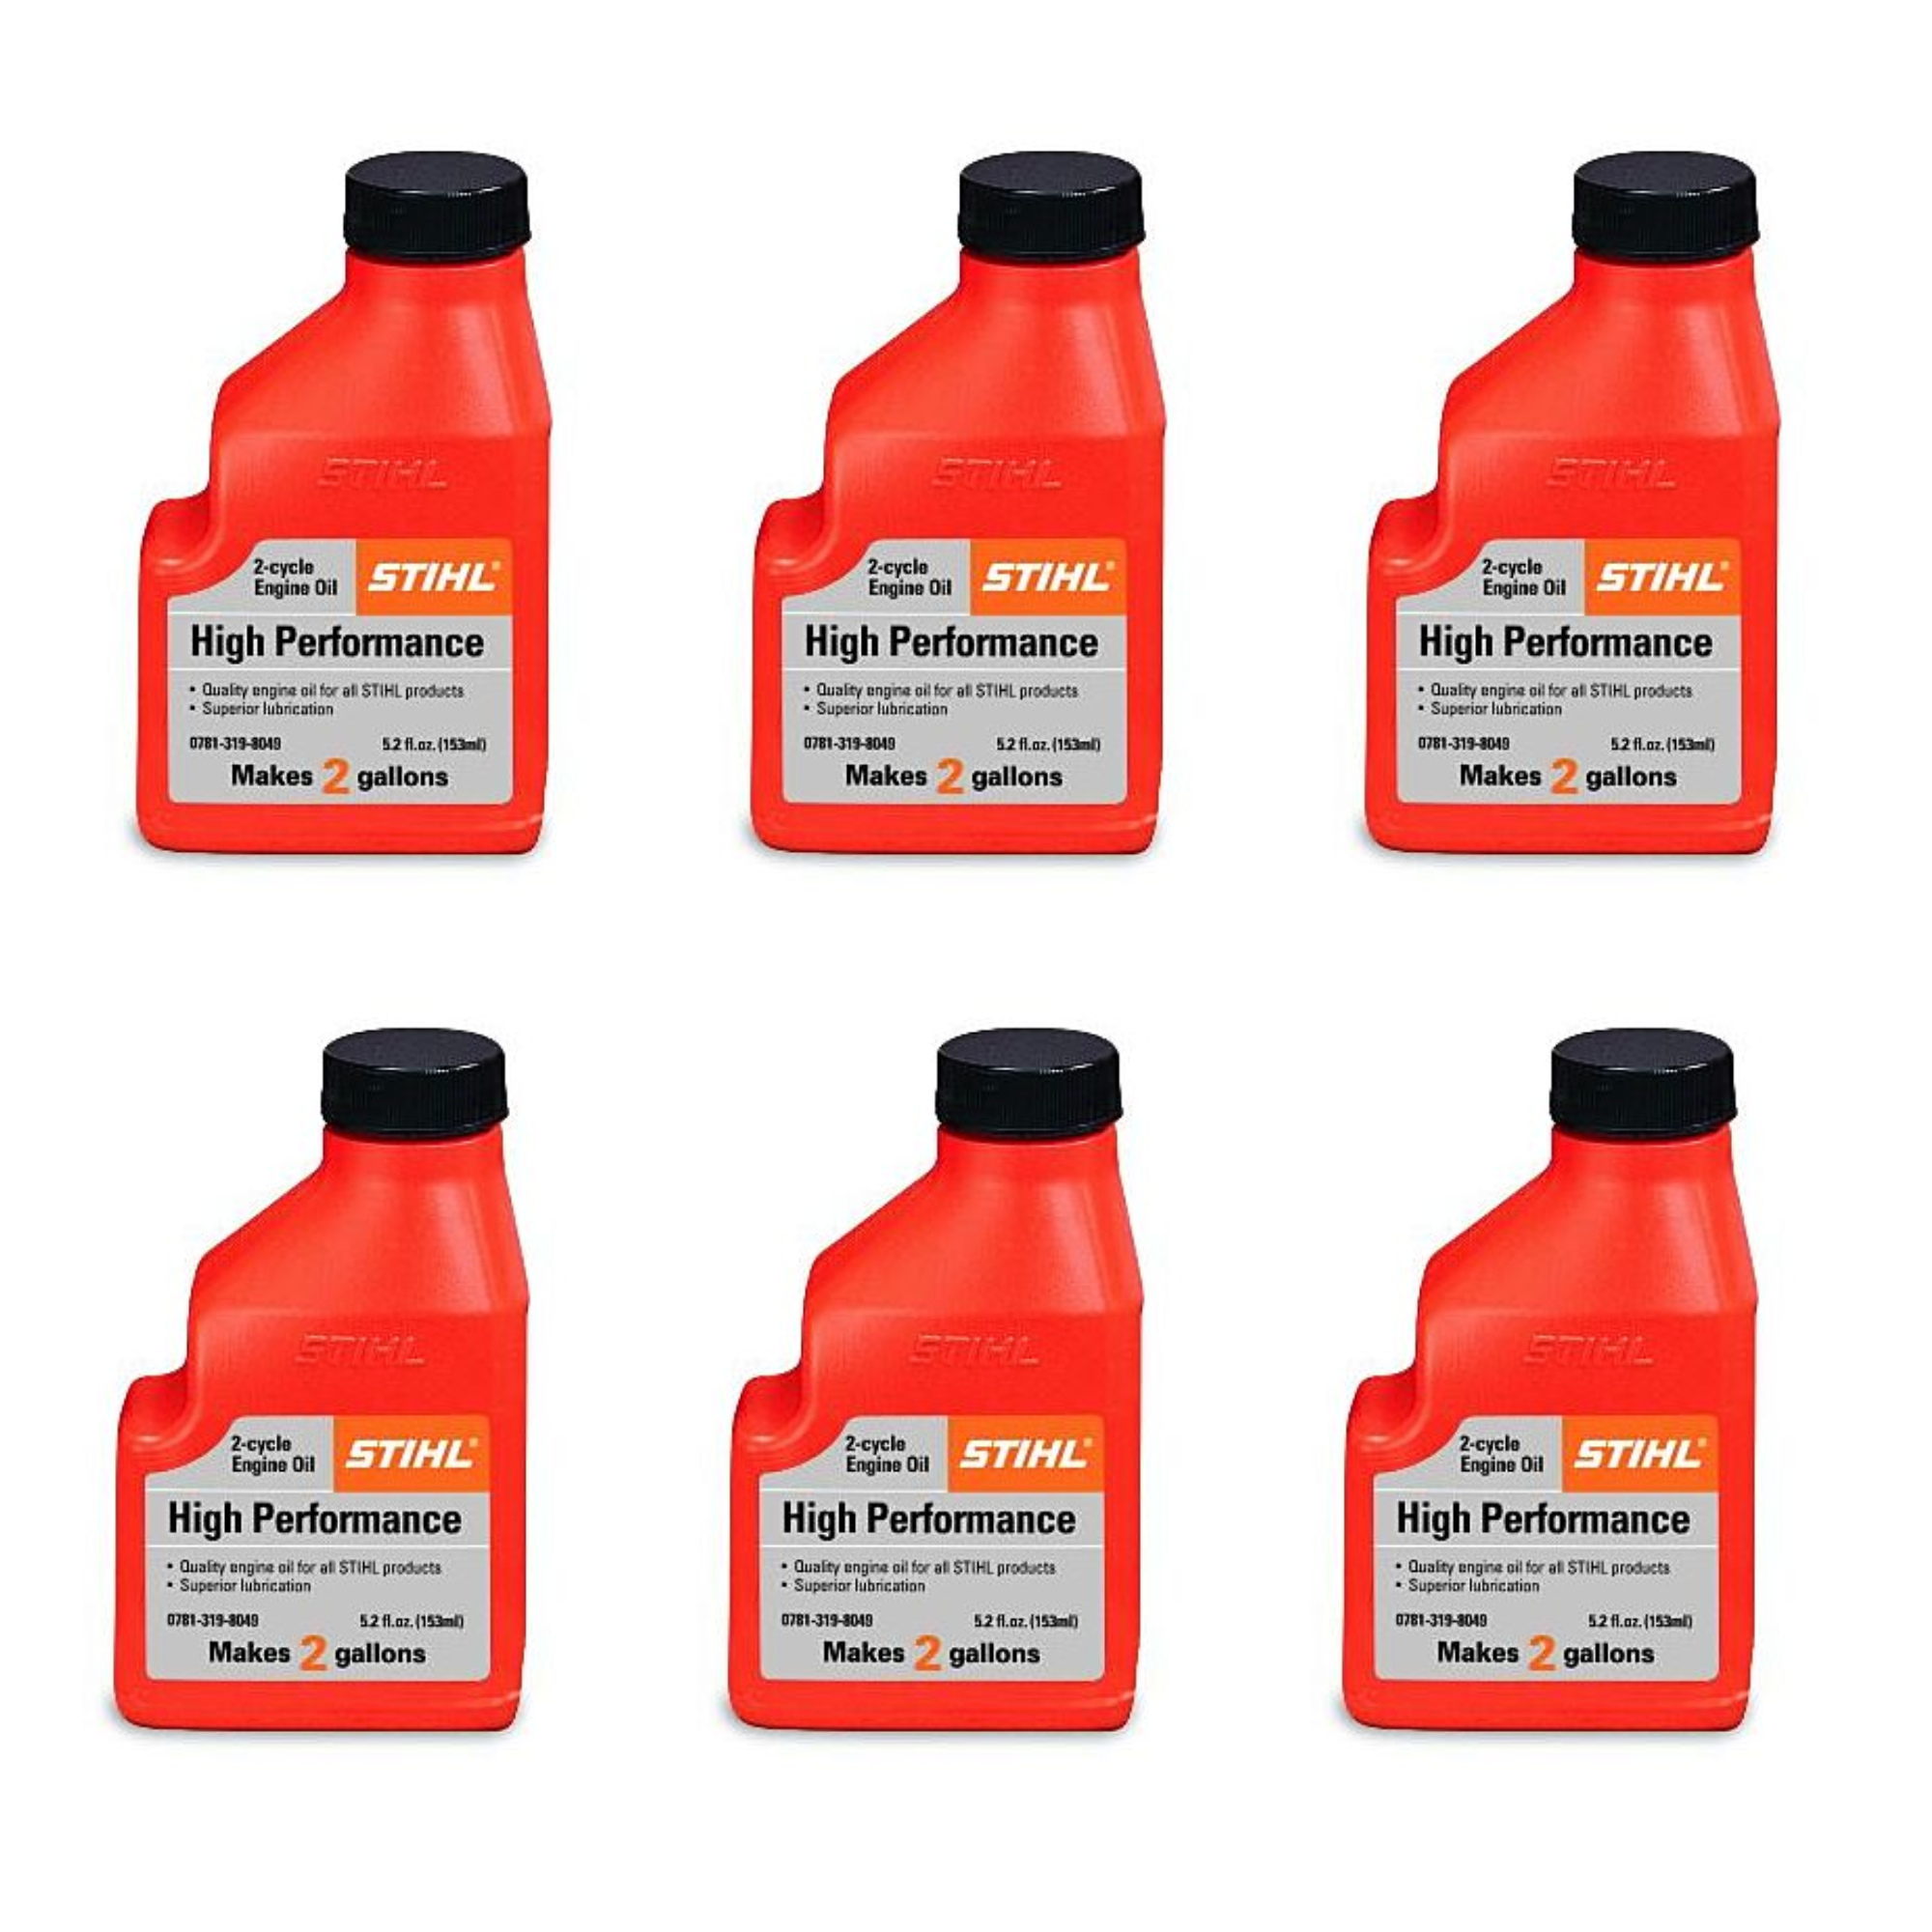 Stihl High Performance 2-Cycle Engine Oil | 5.2 fl oz | Pack of 6 | 0781 319 8011